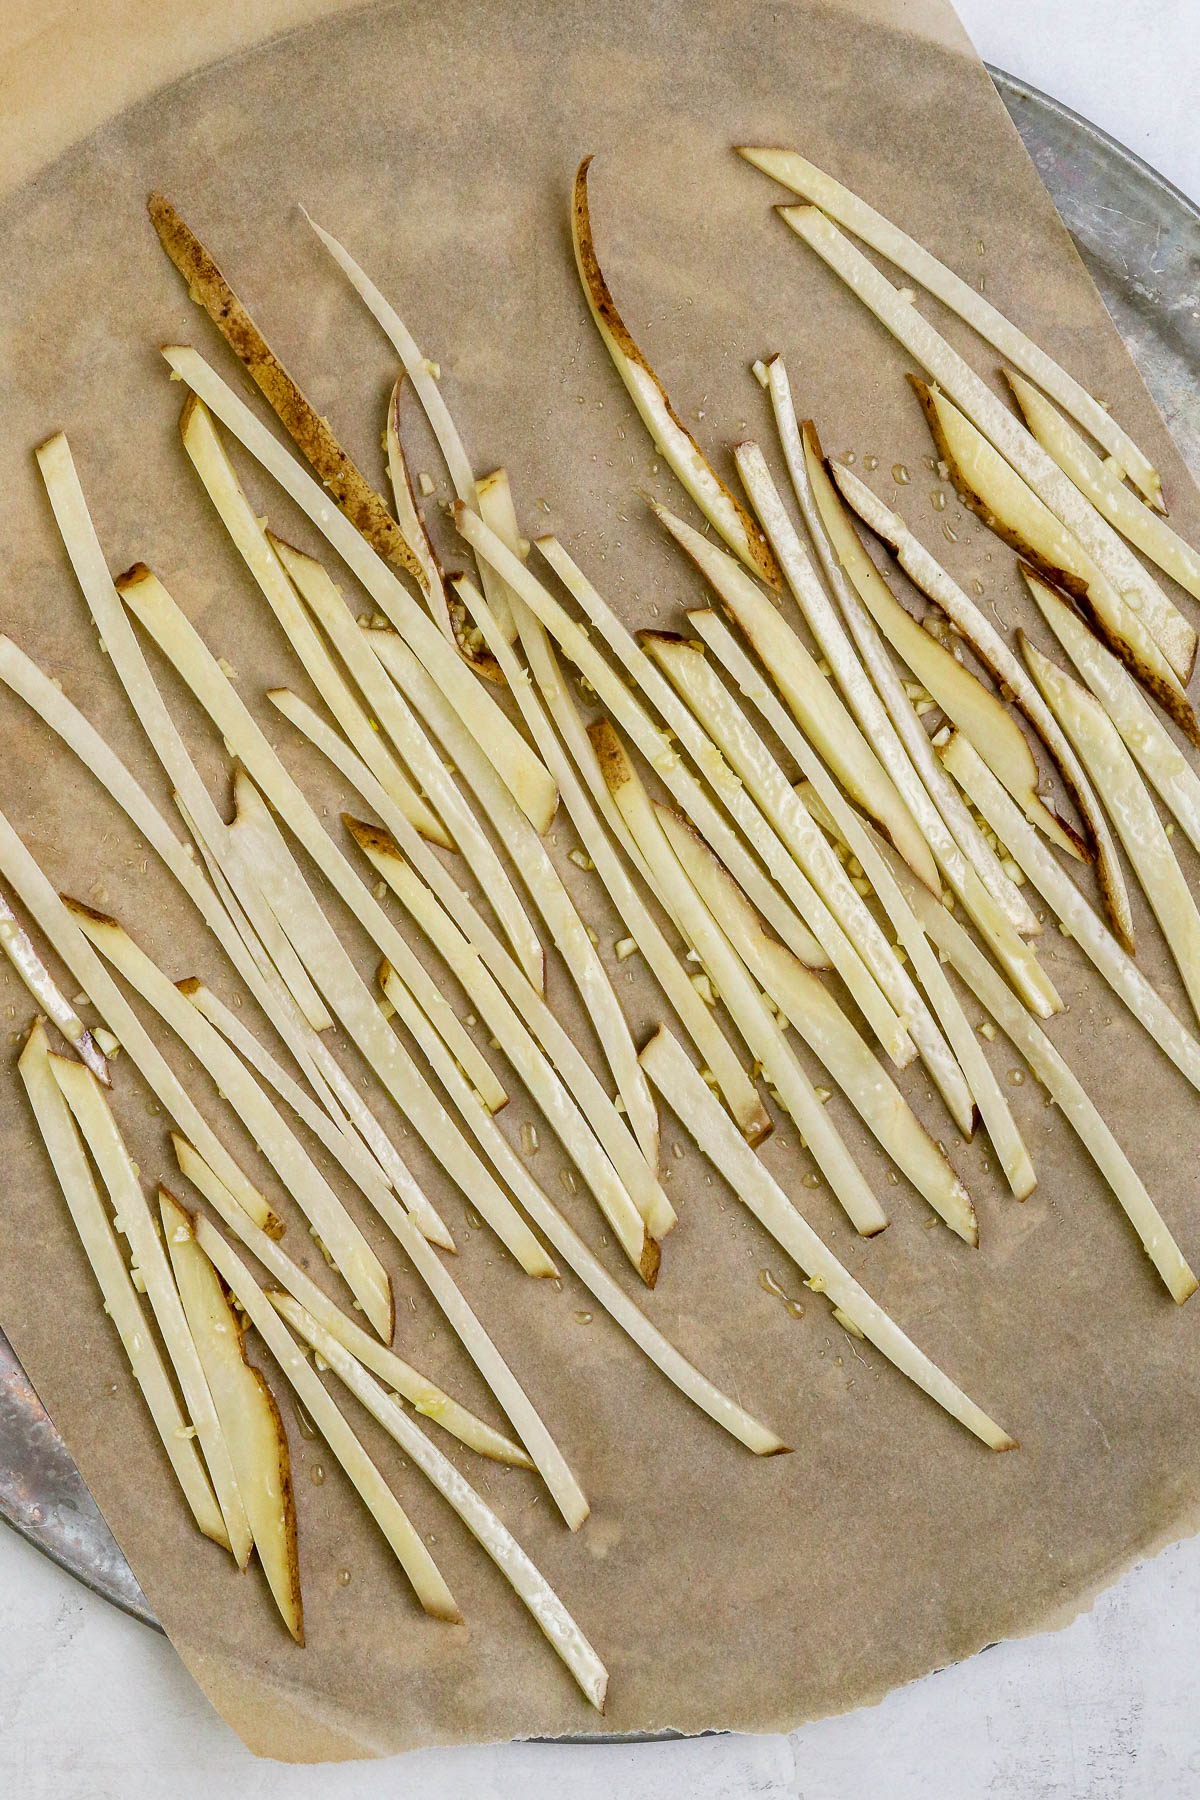 unbaked fries on a baking sheet.